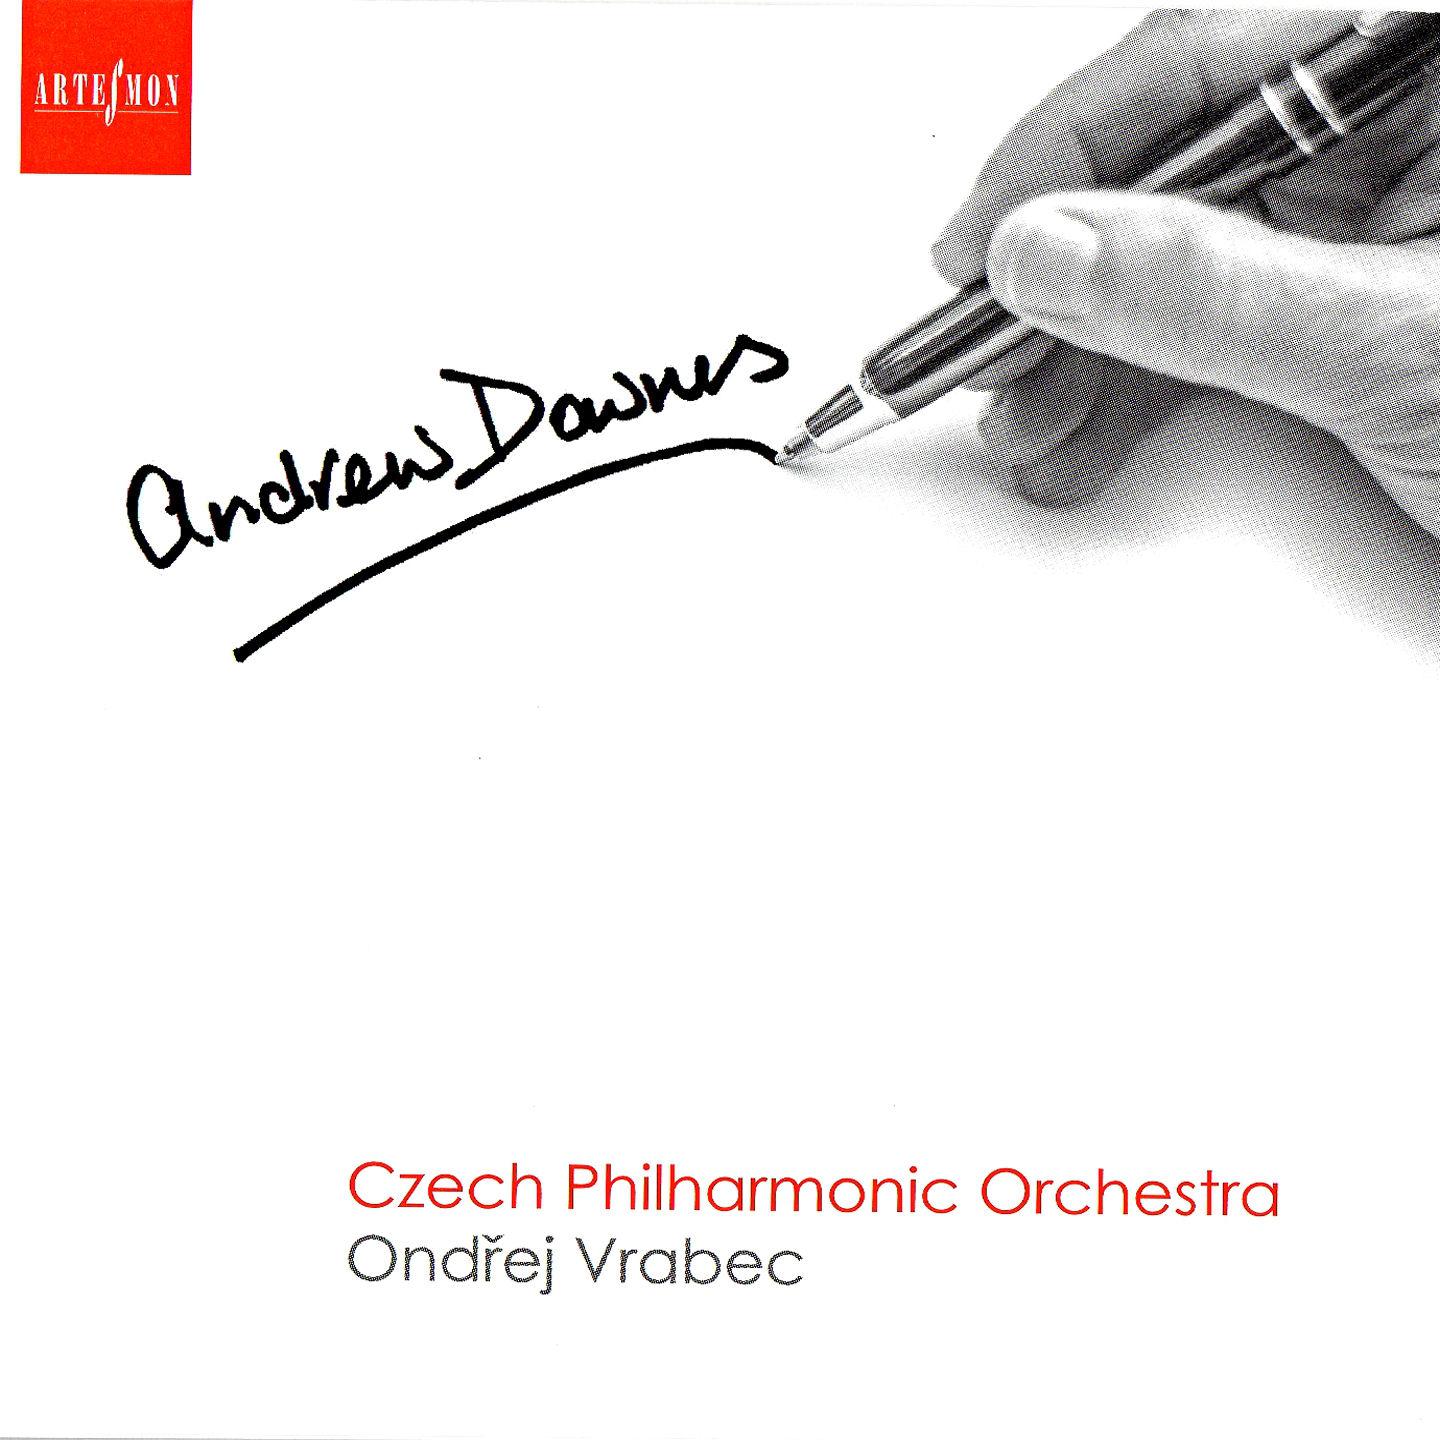 Symphony No. 1 for Organ, Brass, Percussion and Strings, Op. 27: III. Scherzo - Vivace